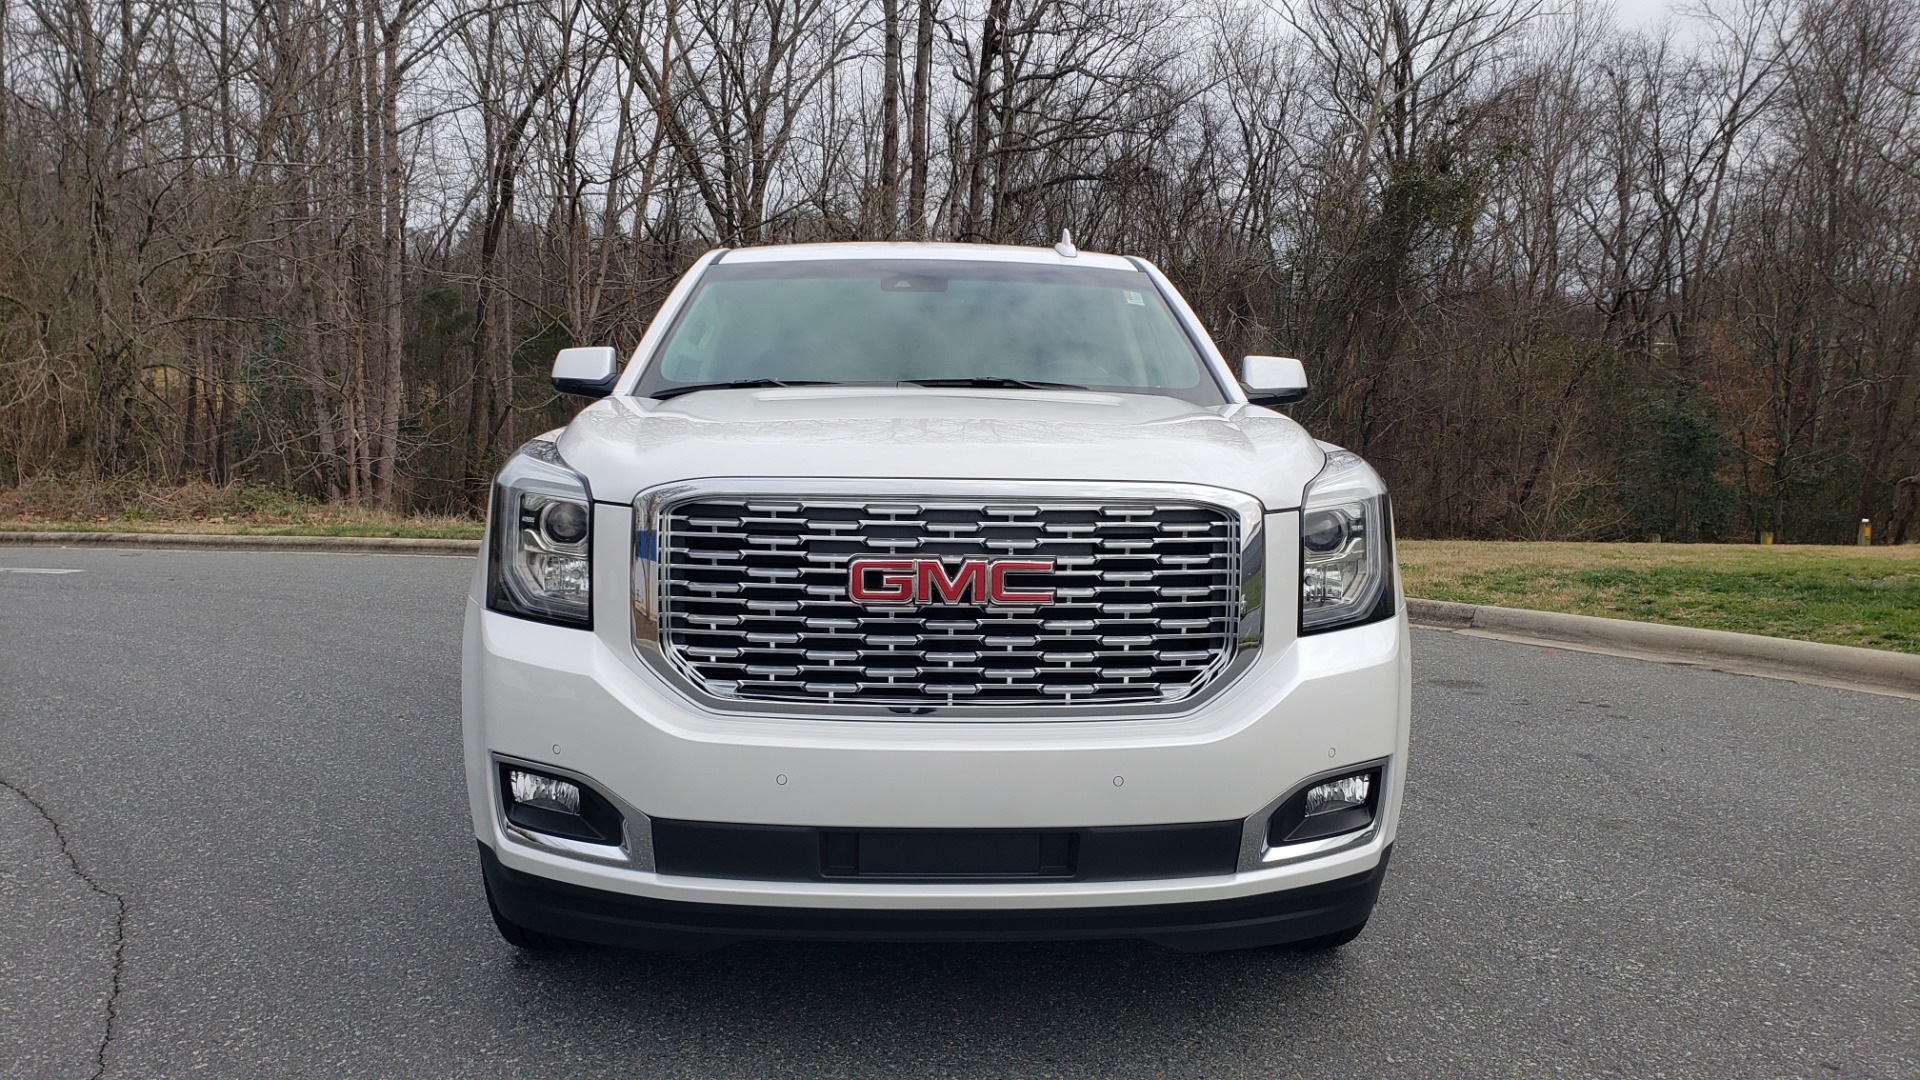 Used 2018 GMC YUKON DENALI 4WD / NAV / SUNROOF / BOSE / 3-ROW / REARVIEW for sale Sold at Formula Imports in Charlotte NC 28227 25